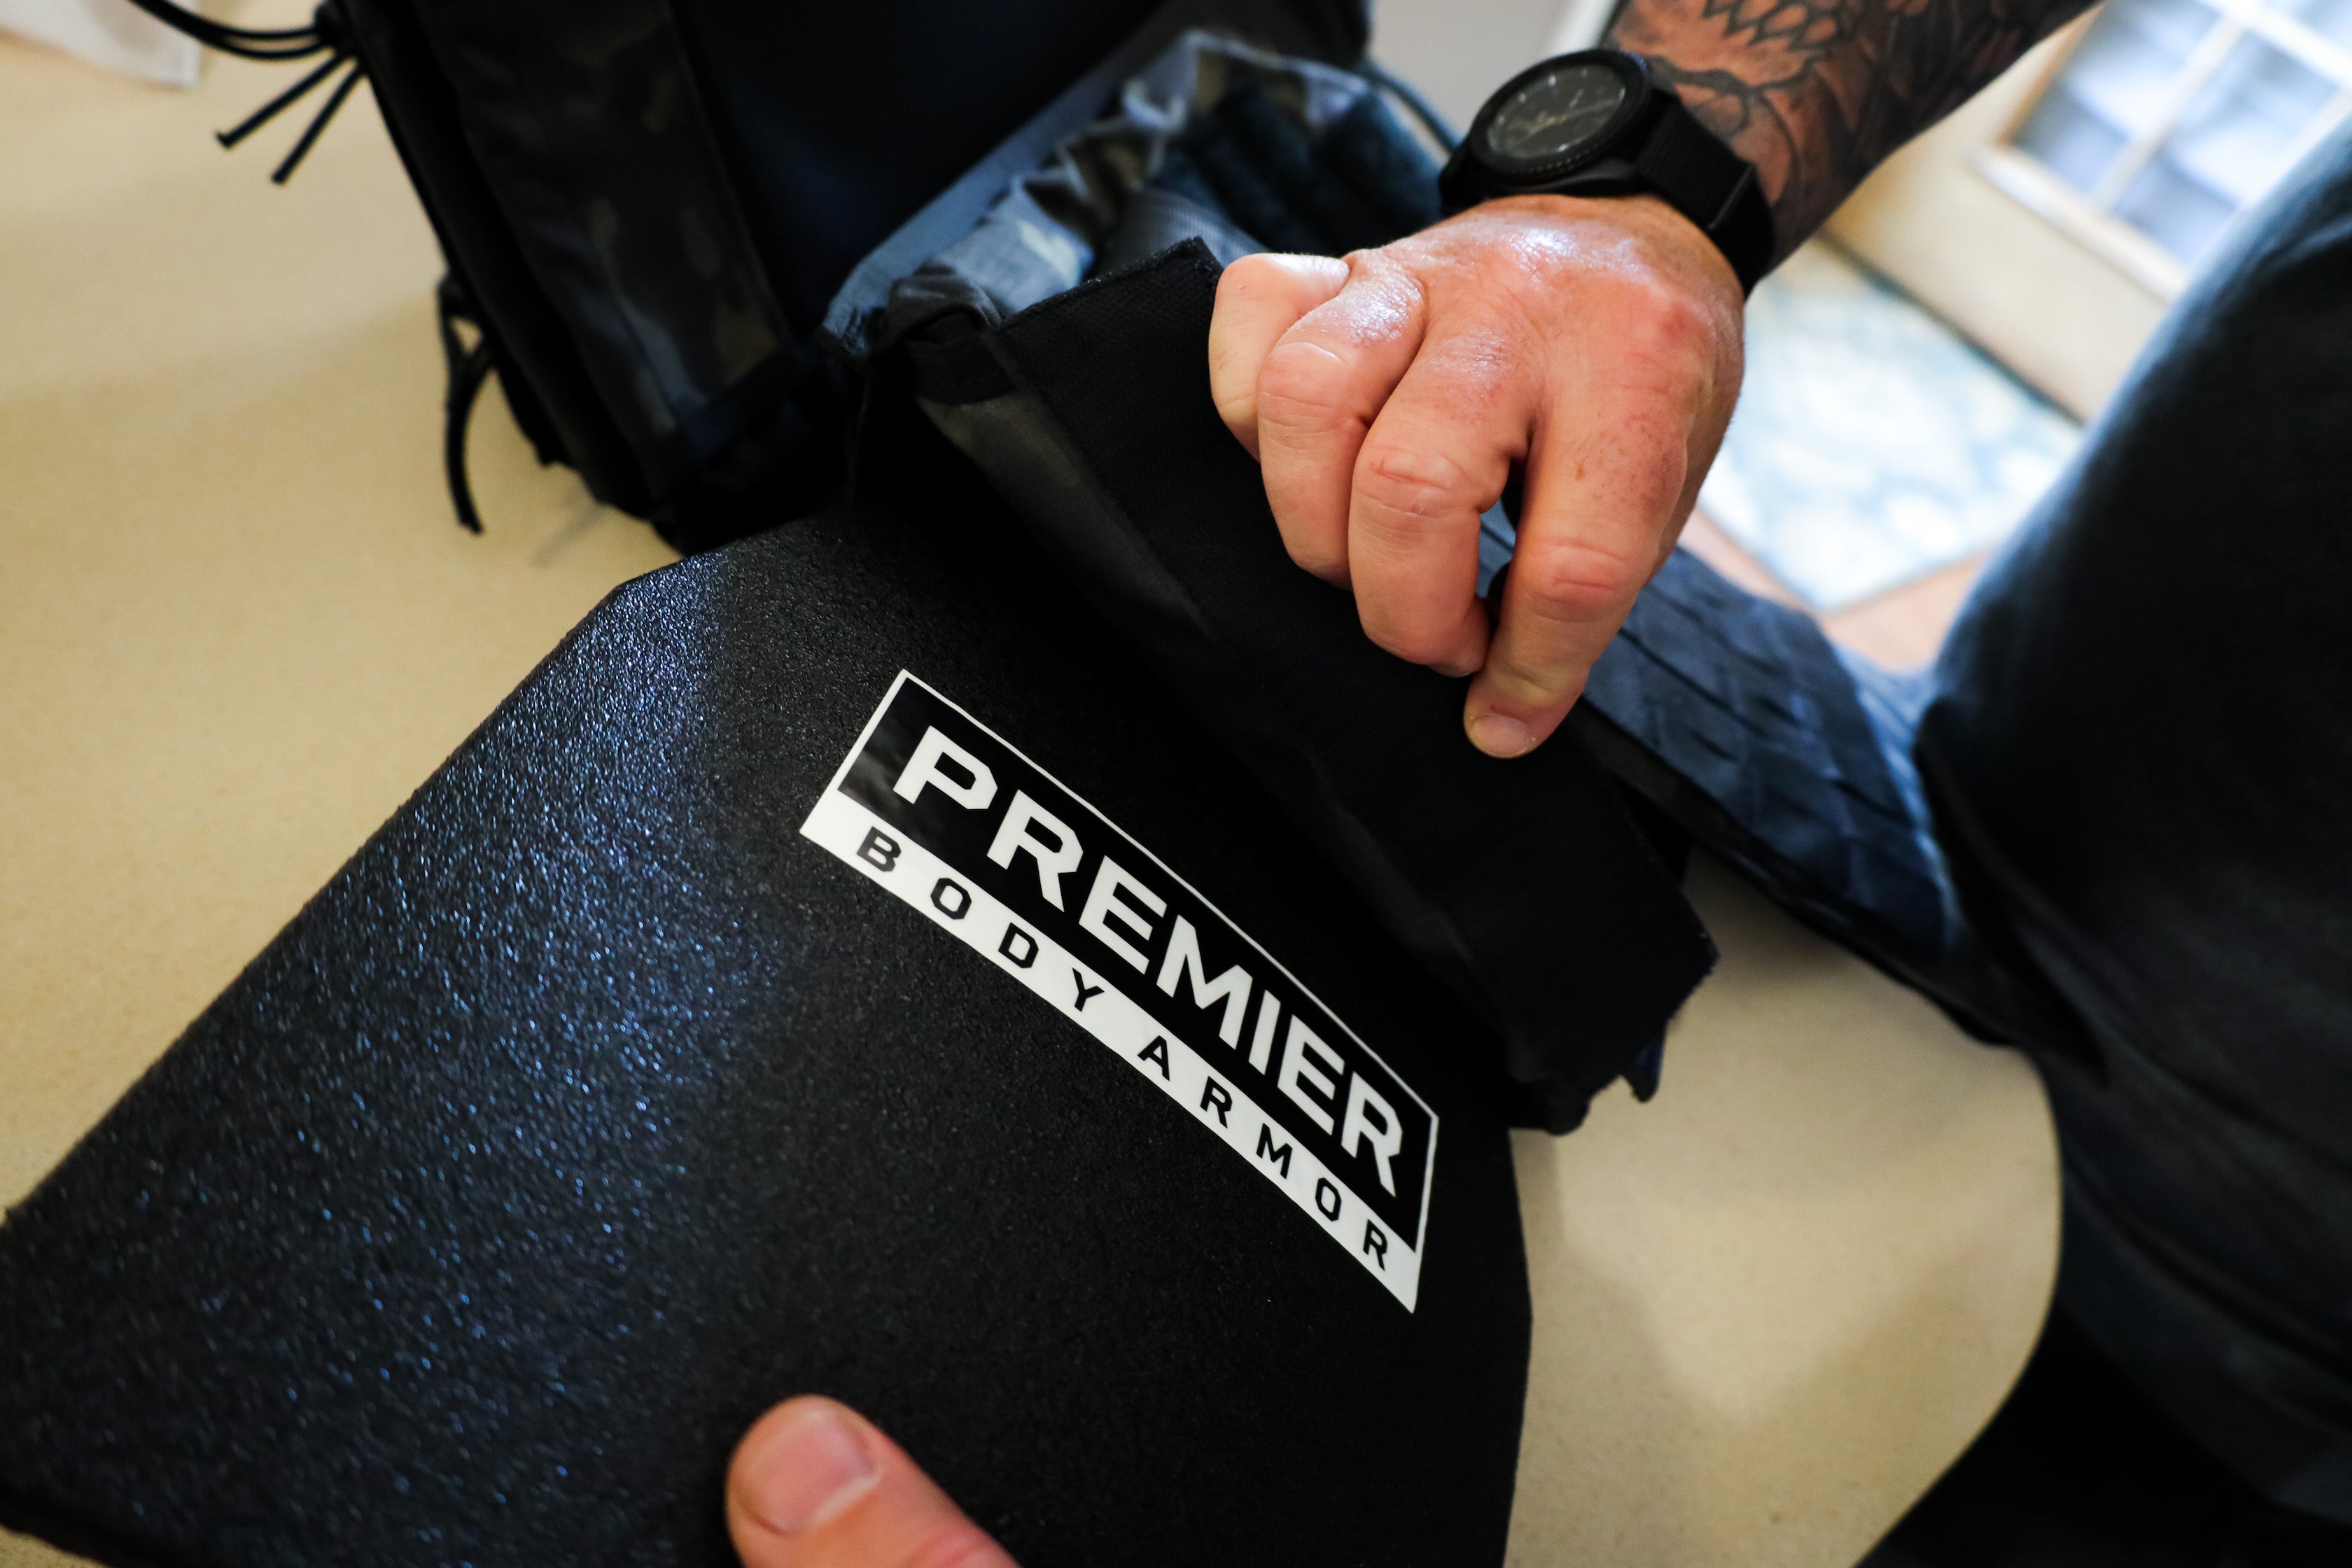 Level 4 / Level IV Rifle Rated Body Armor Plates - Premier Body Armor